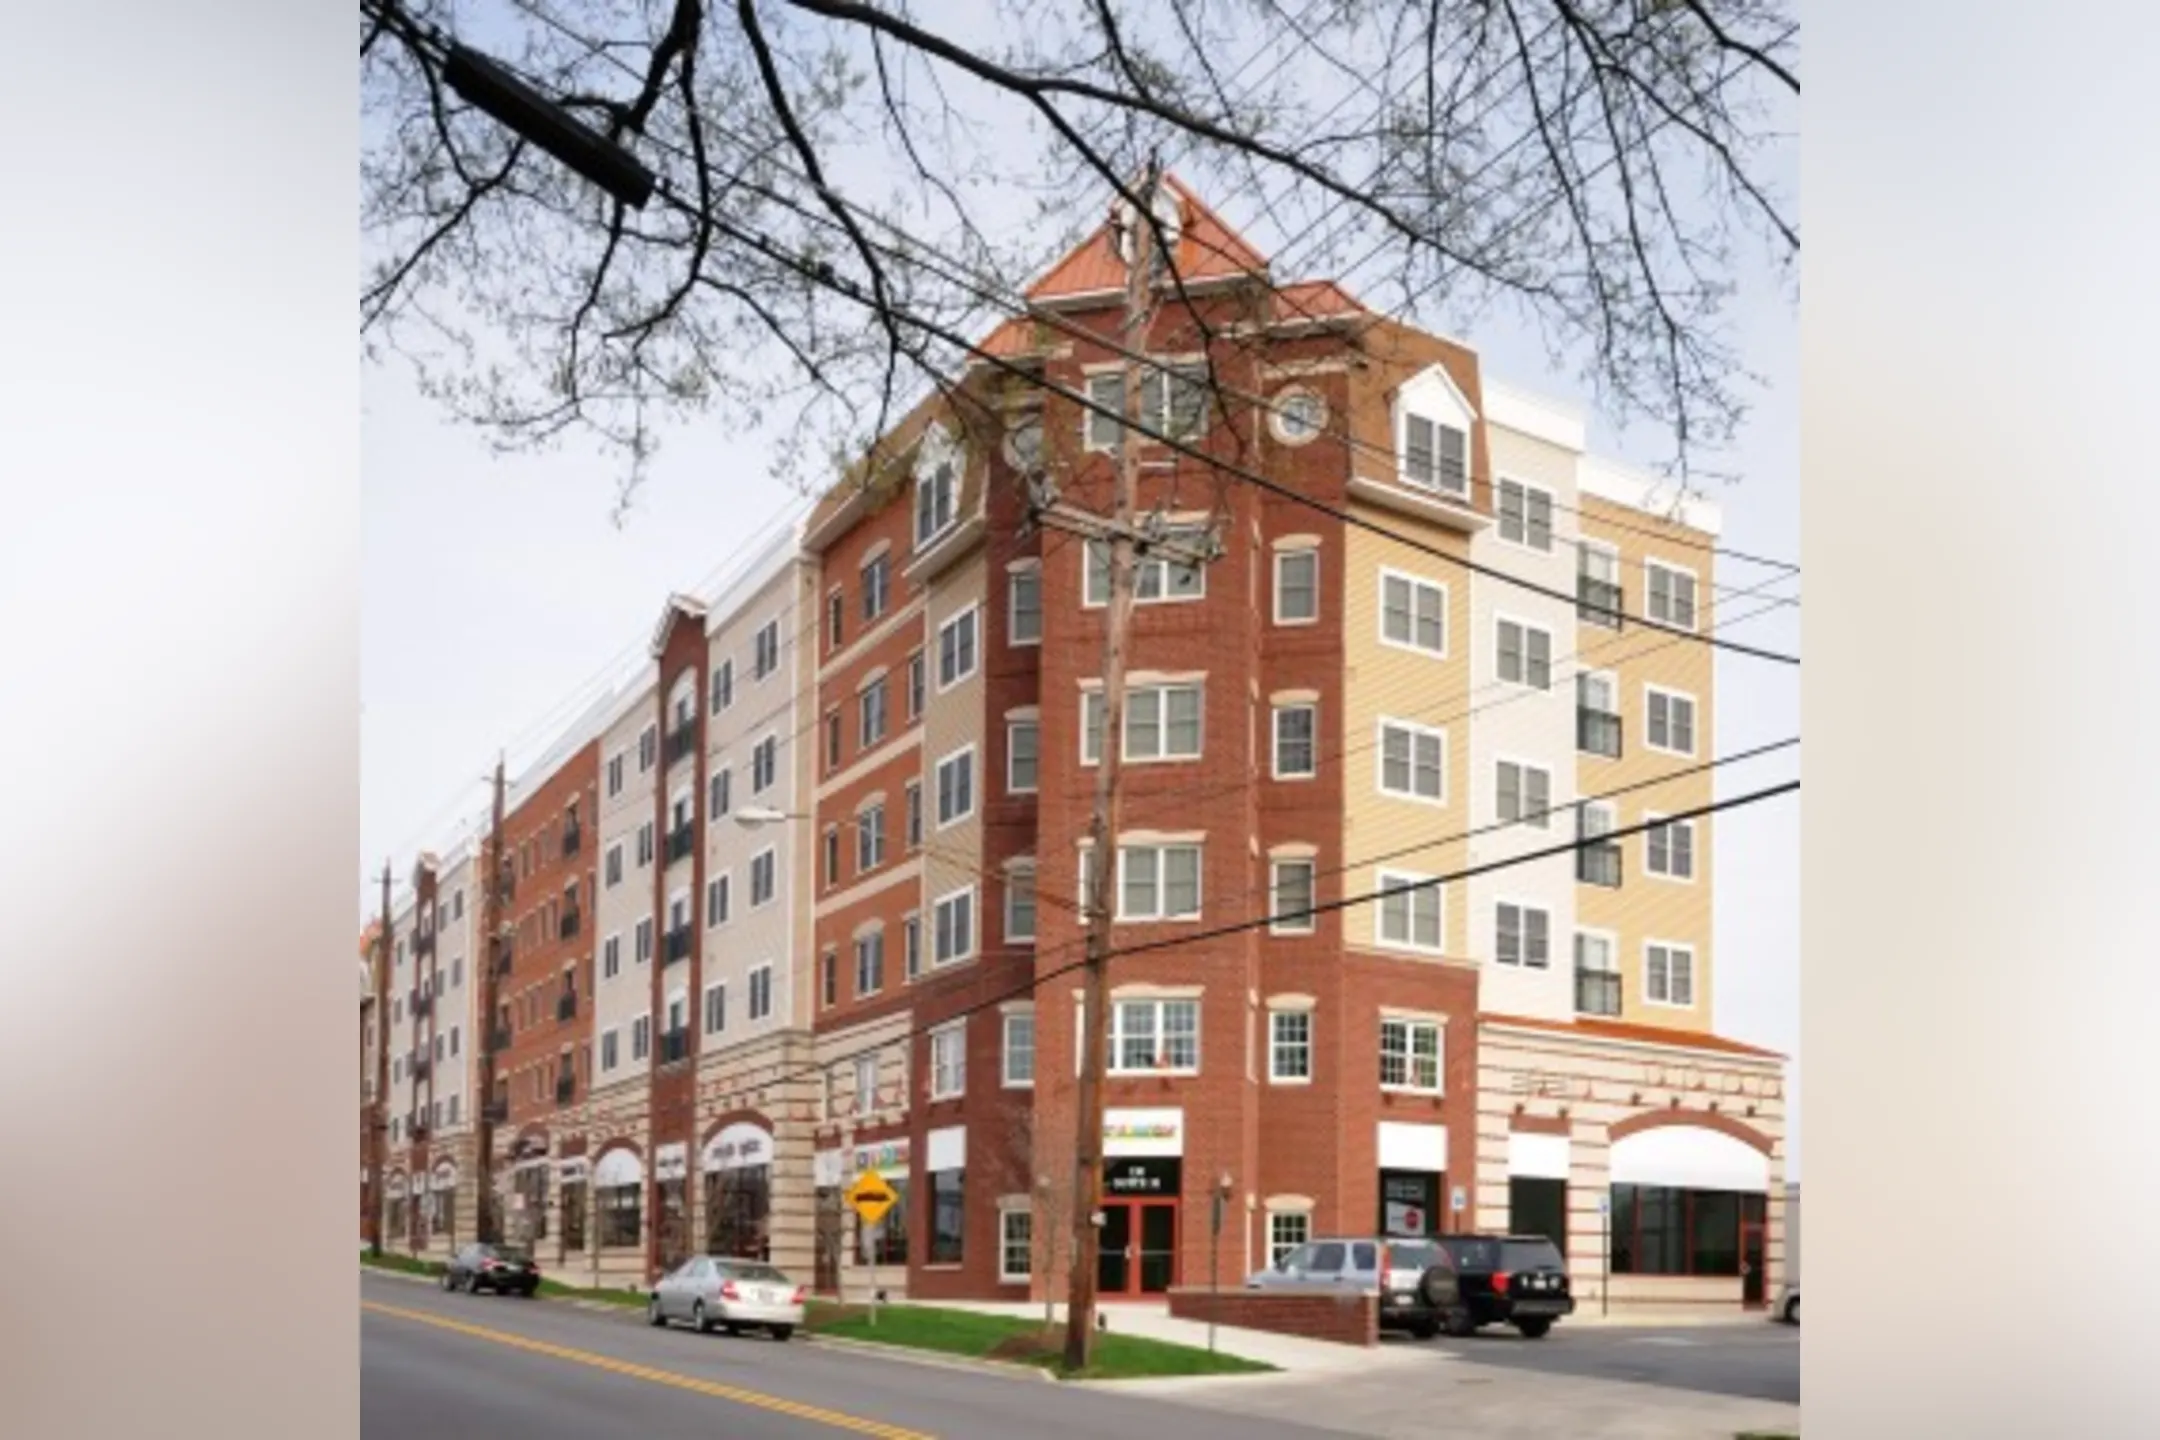 Building - The Residences at Rollins Ridge - Rockville, MD